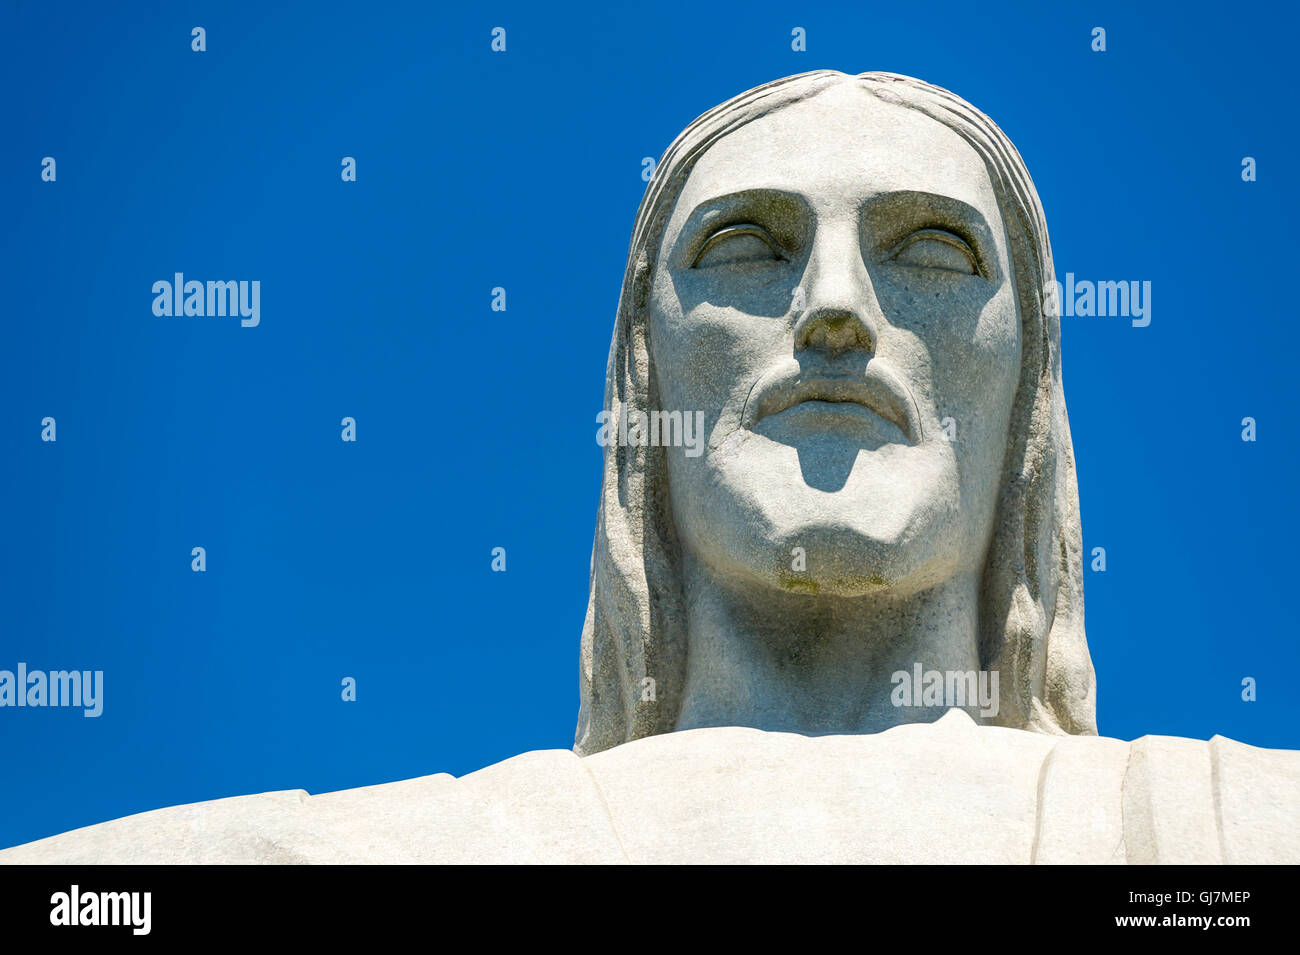 RIO DE JANEIRO - MARCH 21, 2016: The face of the statue of Christ the Redeemer, one of the most recognizable landmarks in Rio. Stock Photo